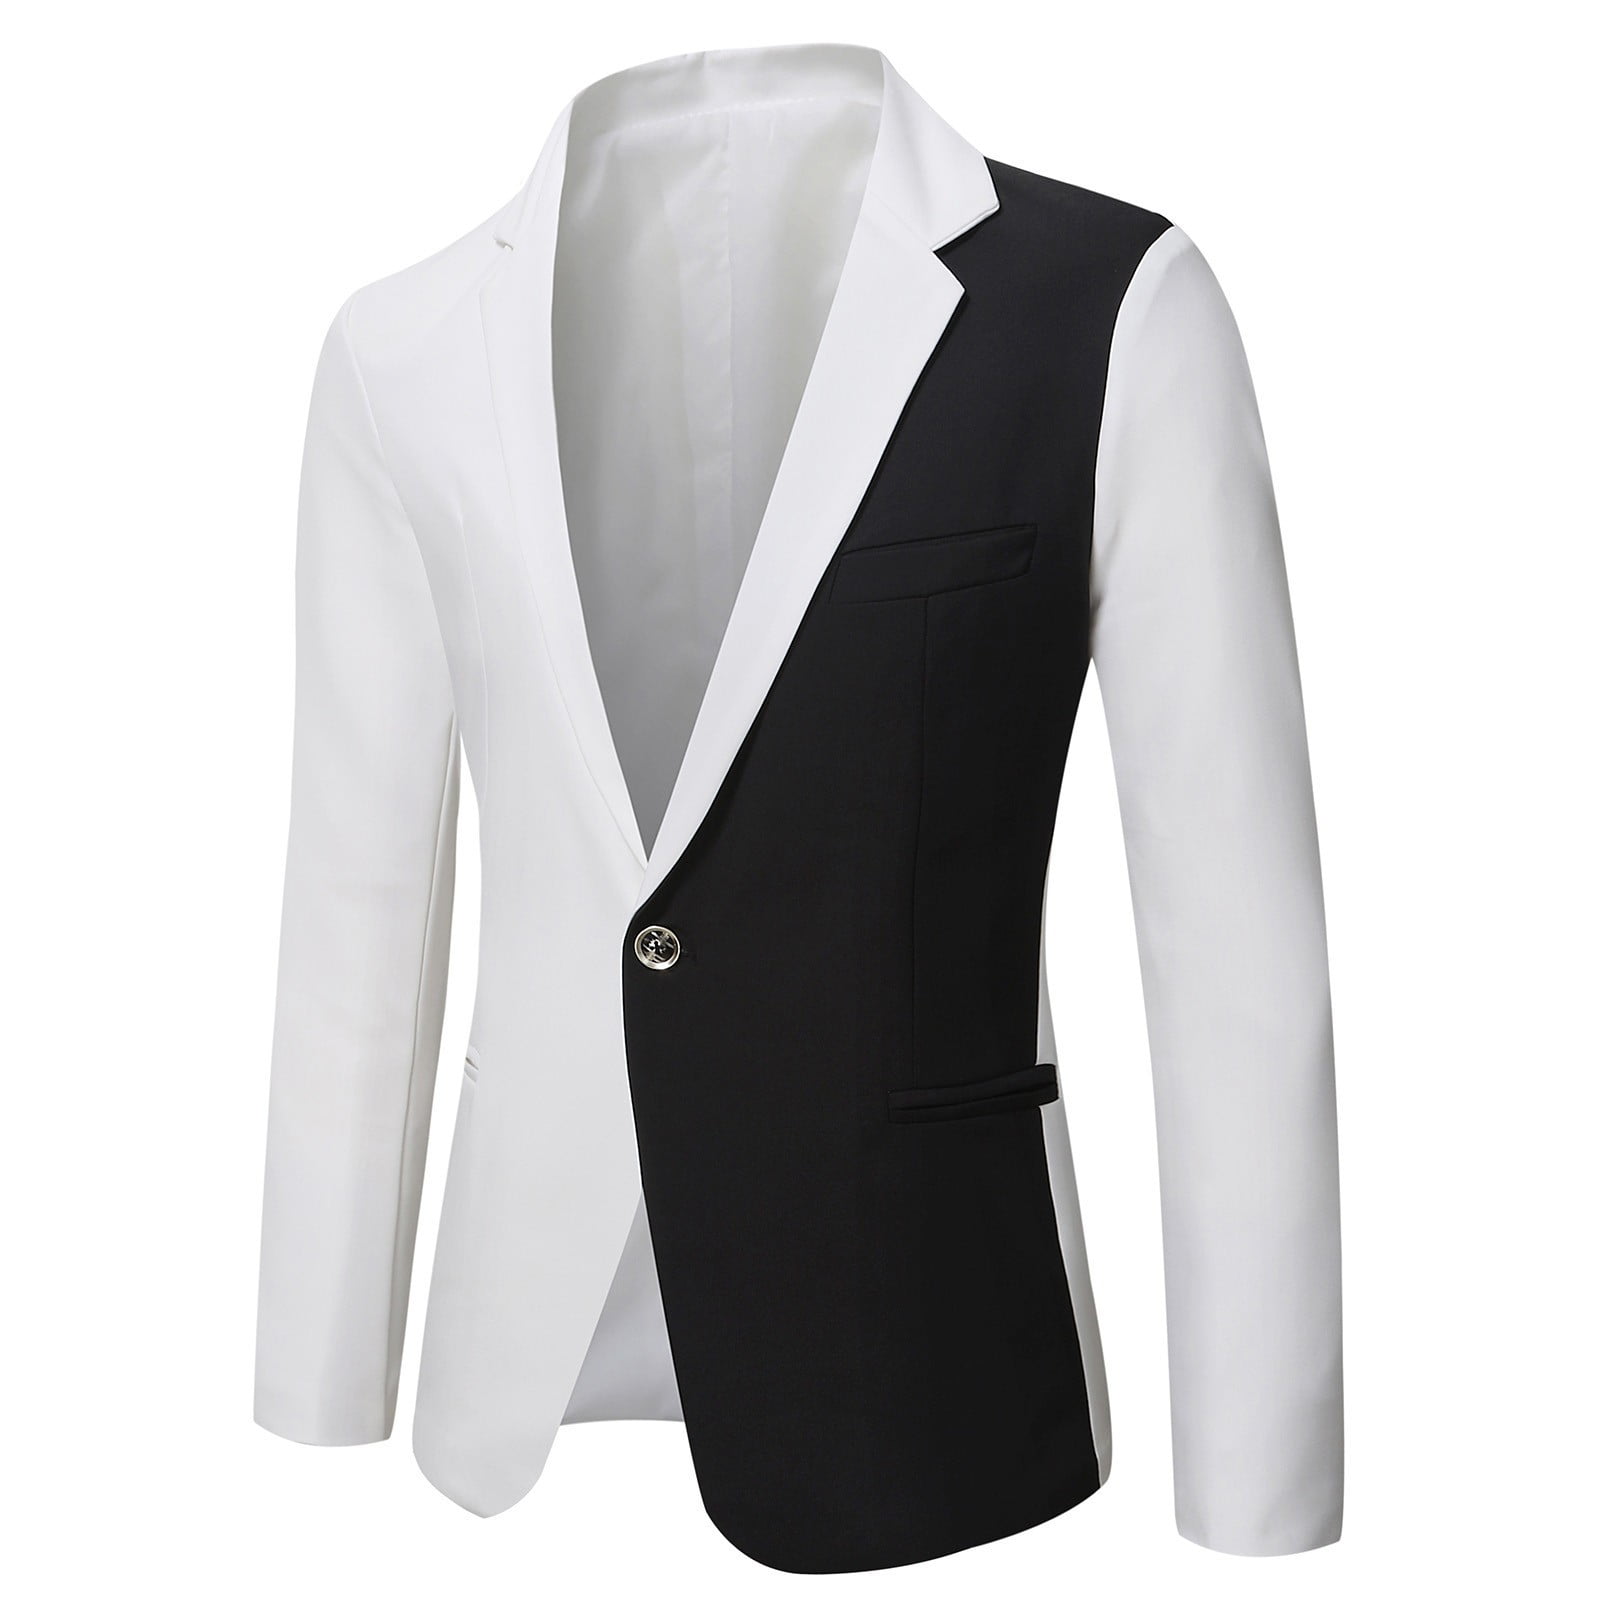 SWSMCLT Men's Long Sleeve Blazer Jacket Fitted Blazer Casual Slim Fit  Button Business Casual Spring Sport Coat Black Large 